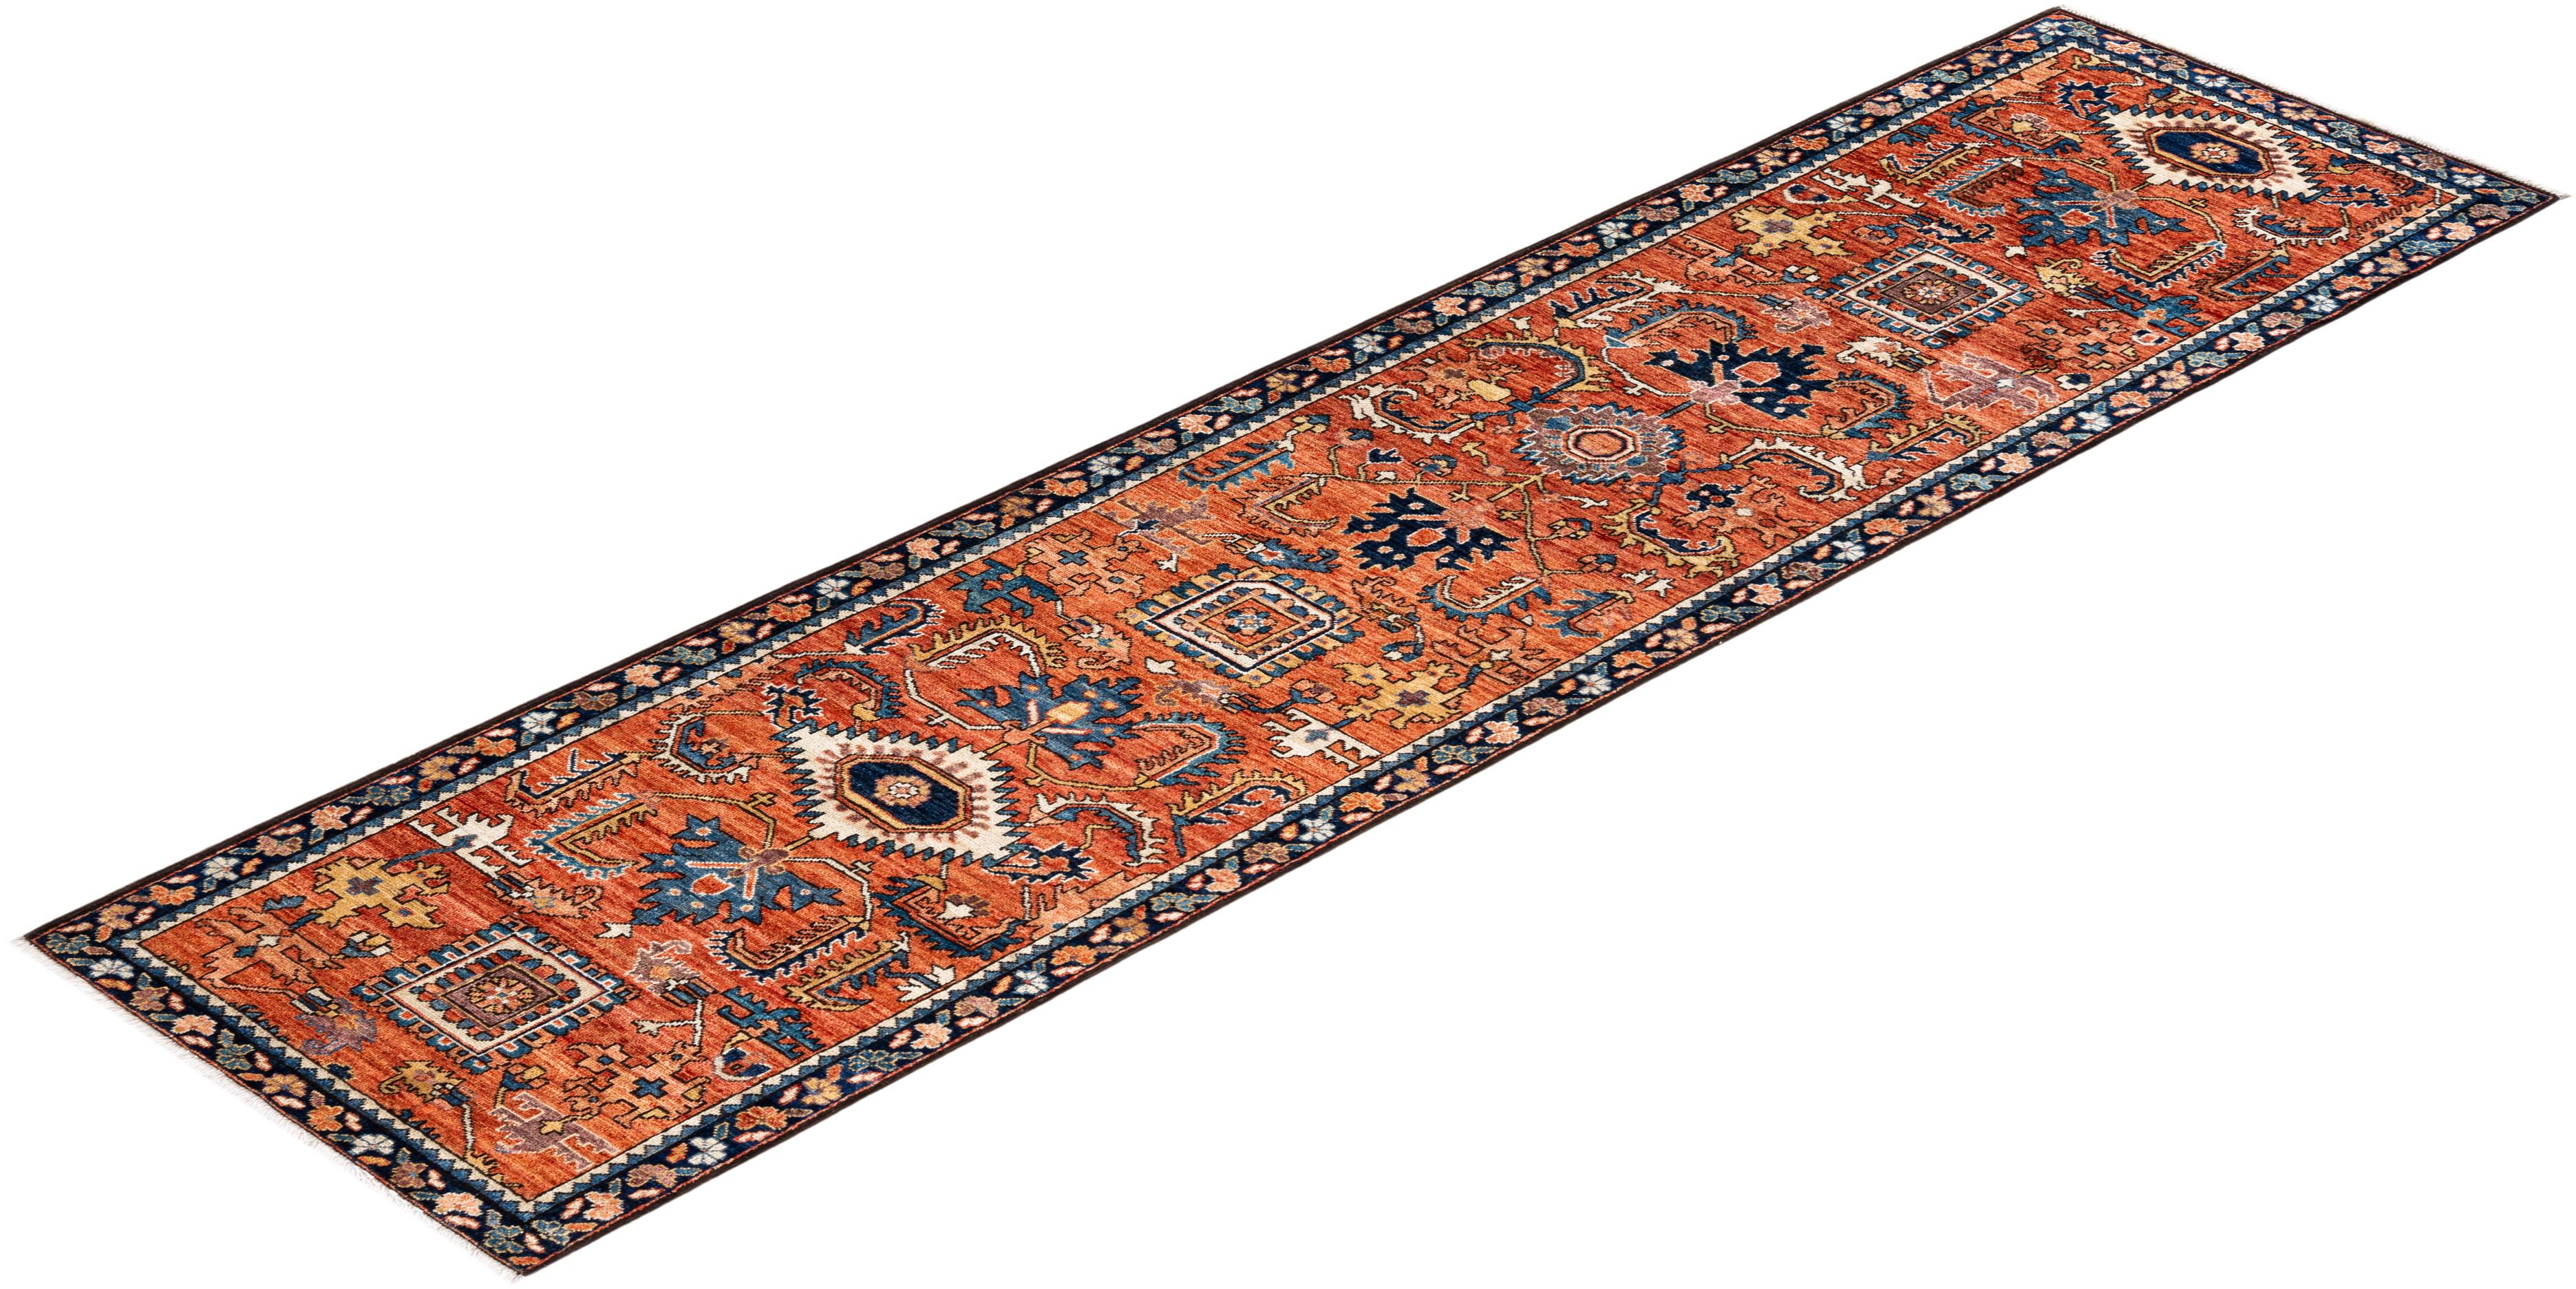 Tribal Serapi, One-of-a-kind Hand-Knotted Runner Rug, Orange For Sale